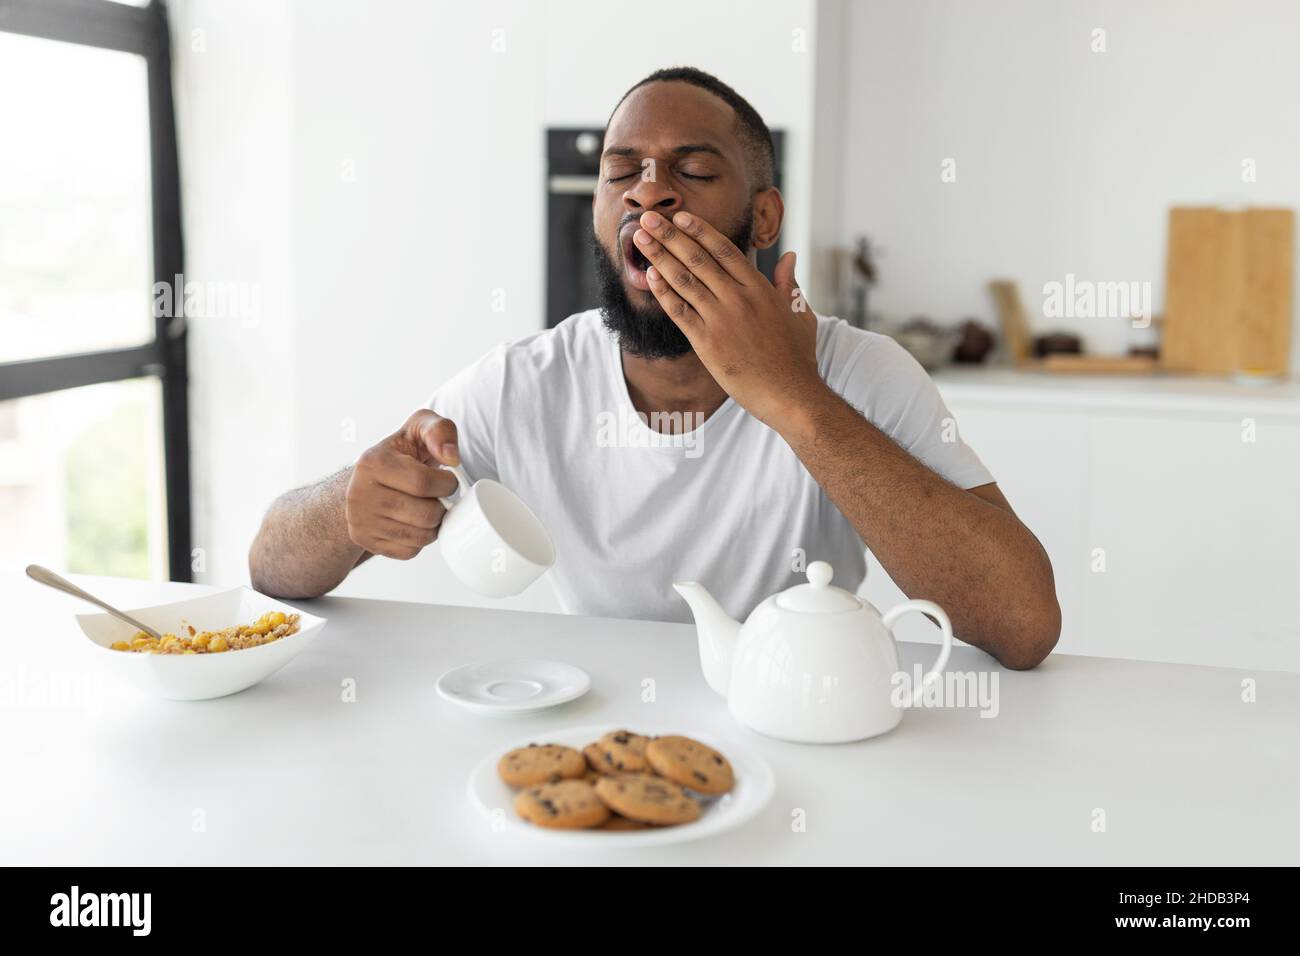 Black man yawning, pouring coffee away from cup Stock Photo